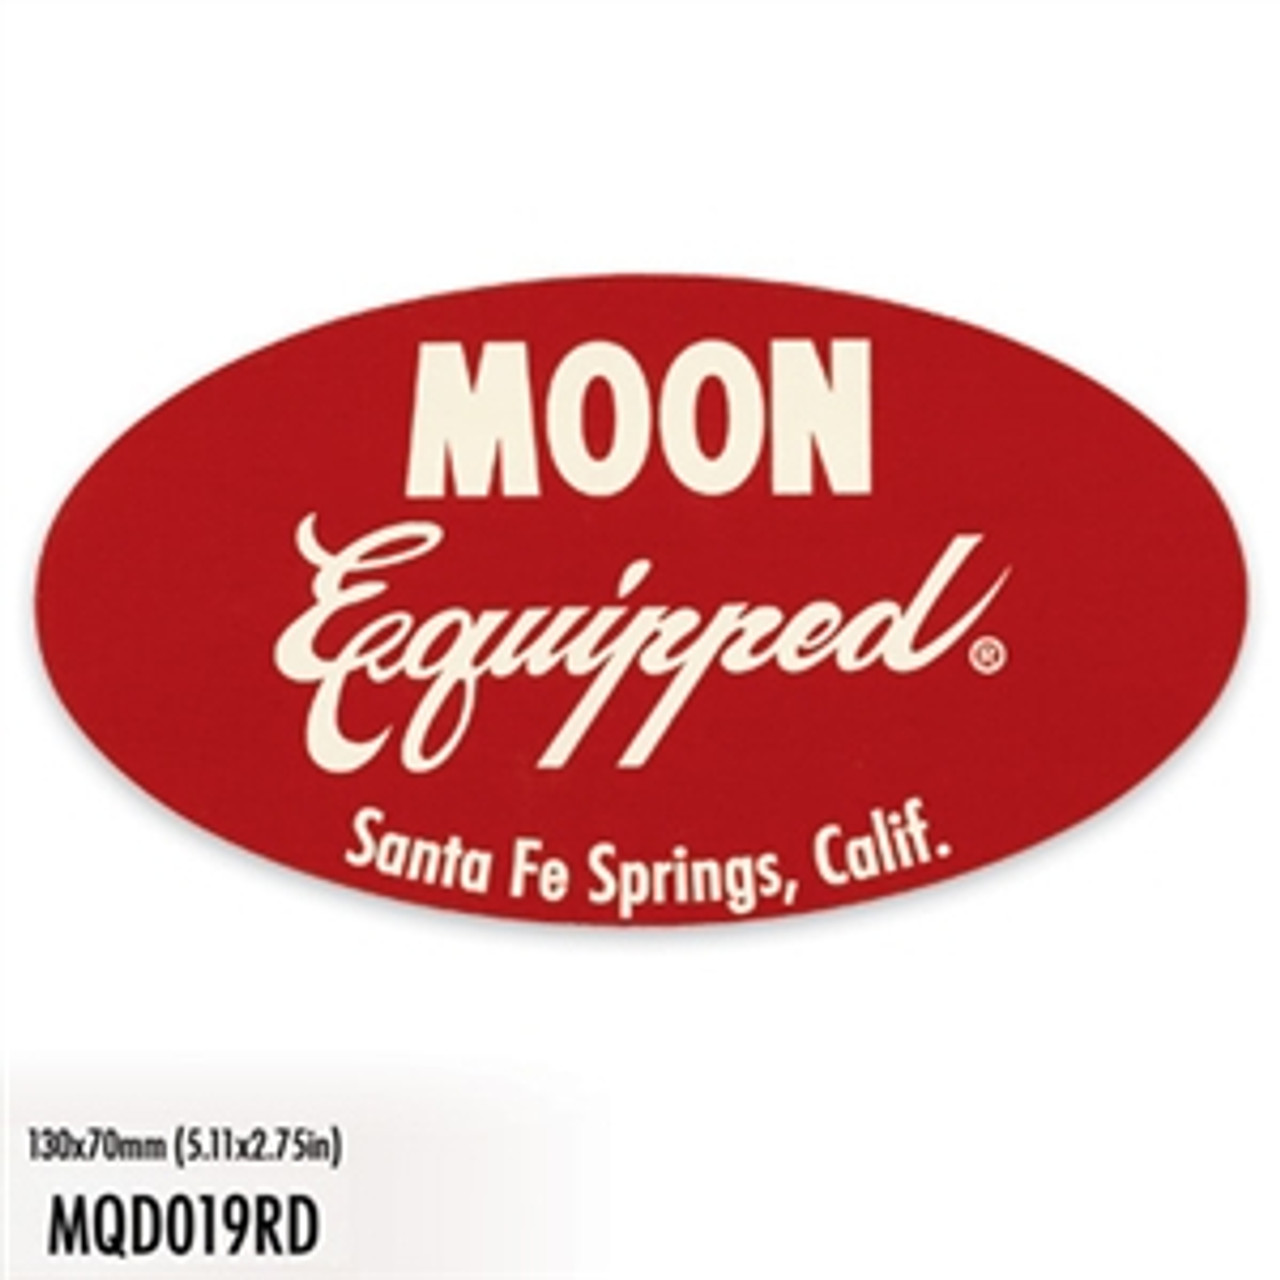 Mooneyes Equipped Oval Decal, Red